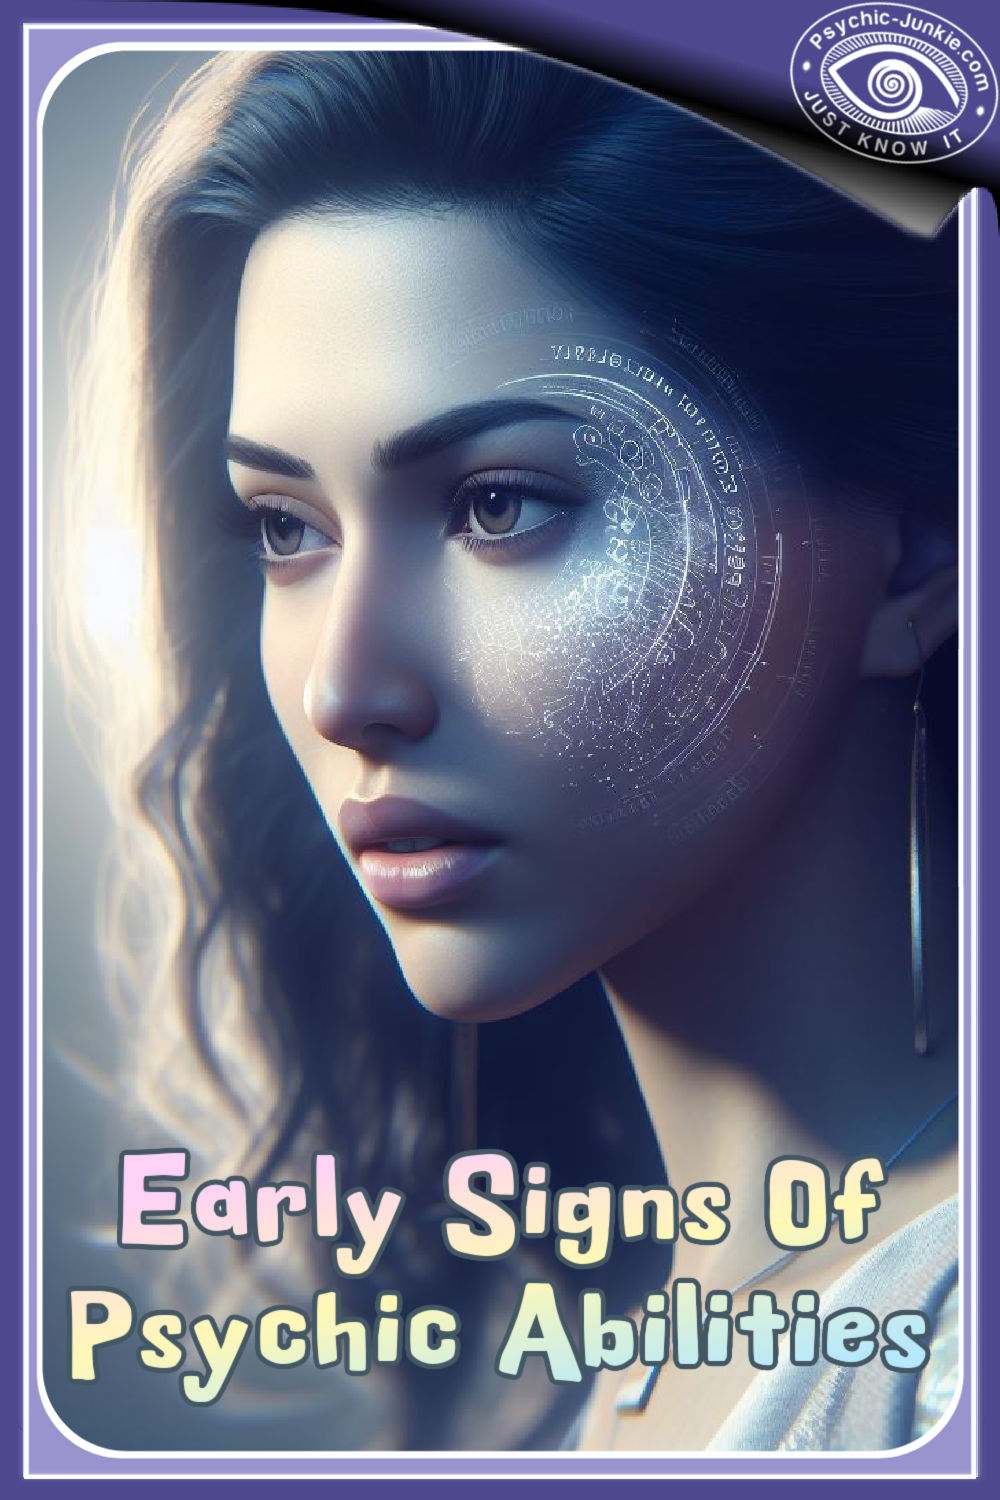 Early Signs Of Psychic Abilities